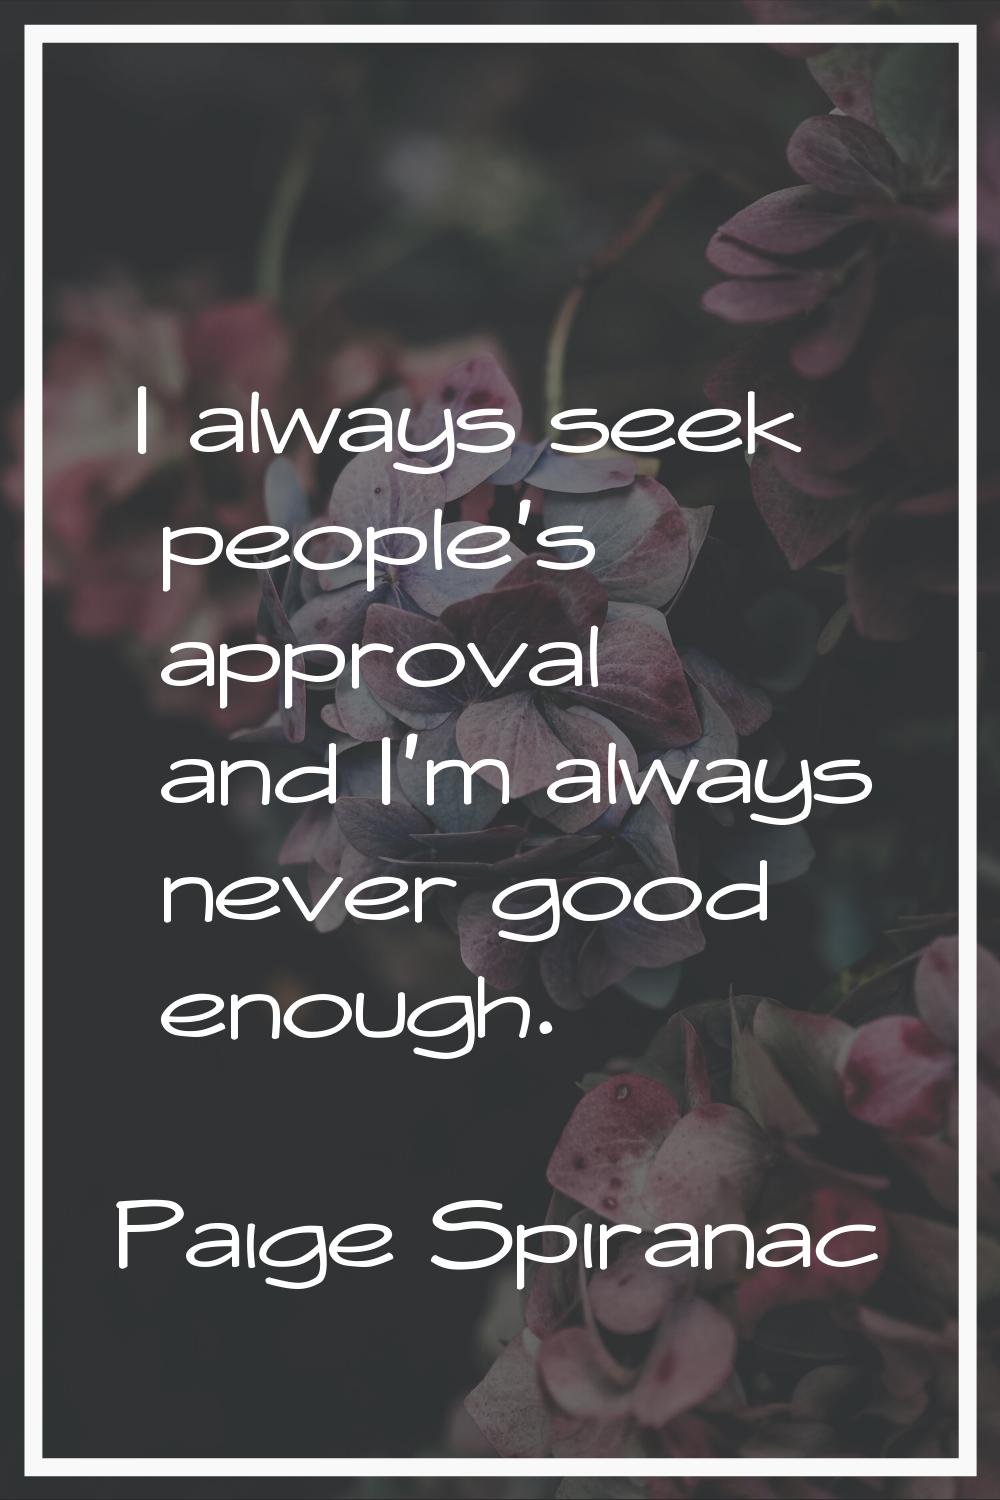 I always seek people's approval and I'm always never good enough.